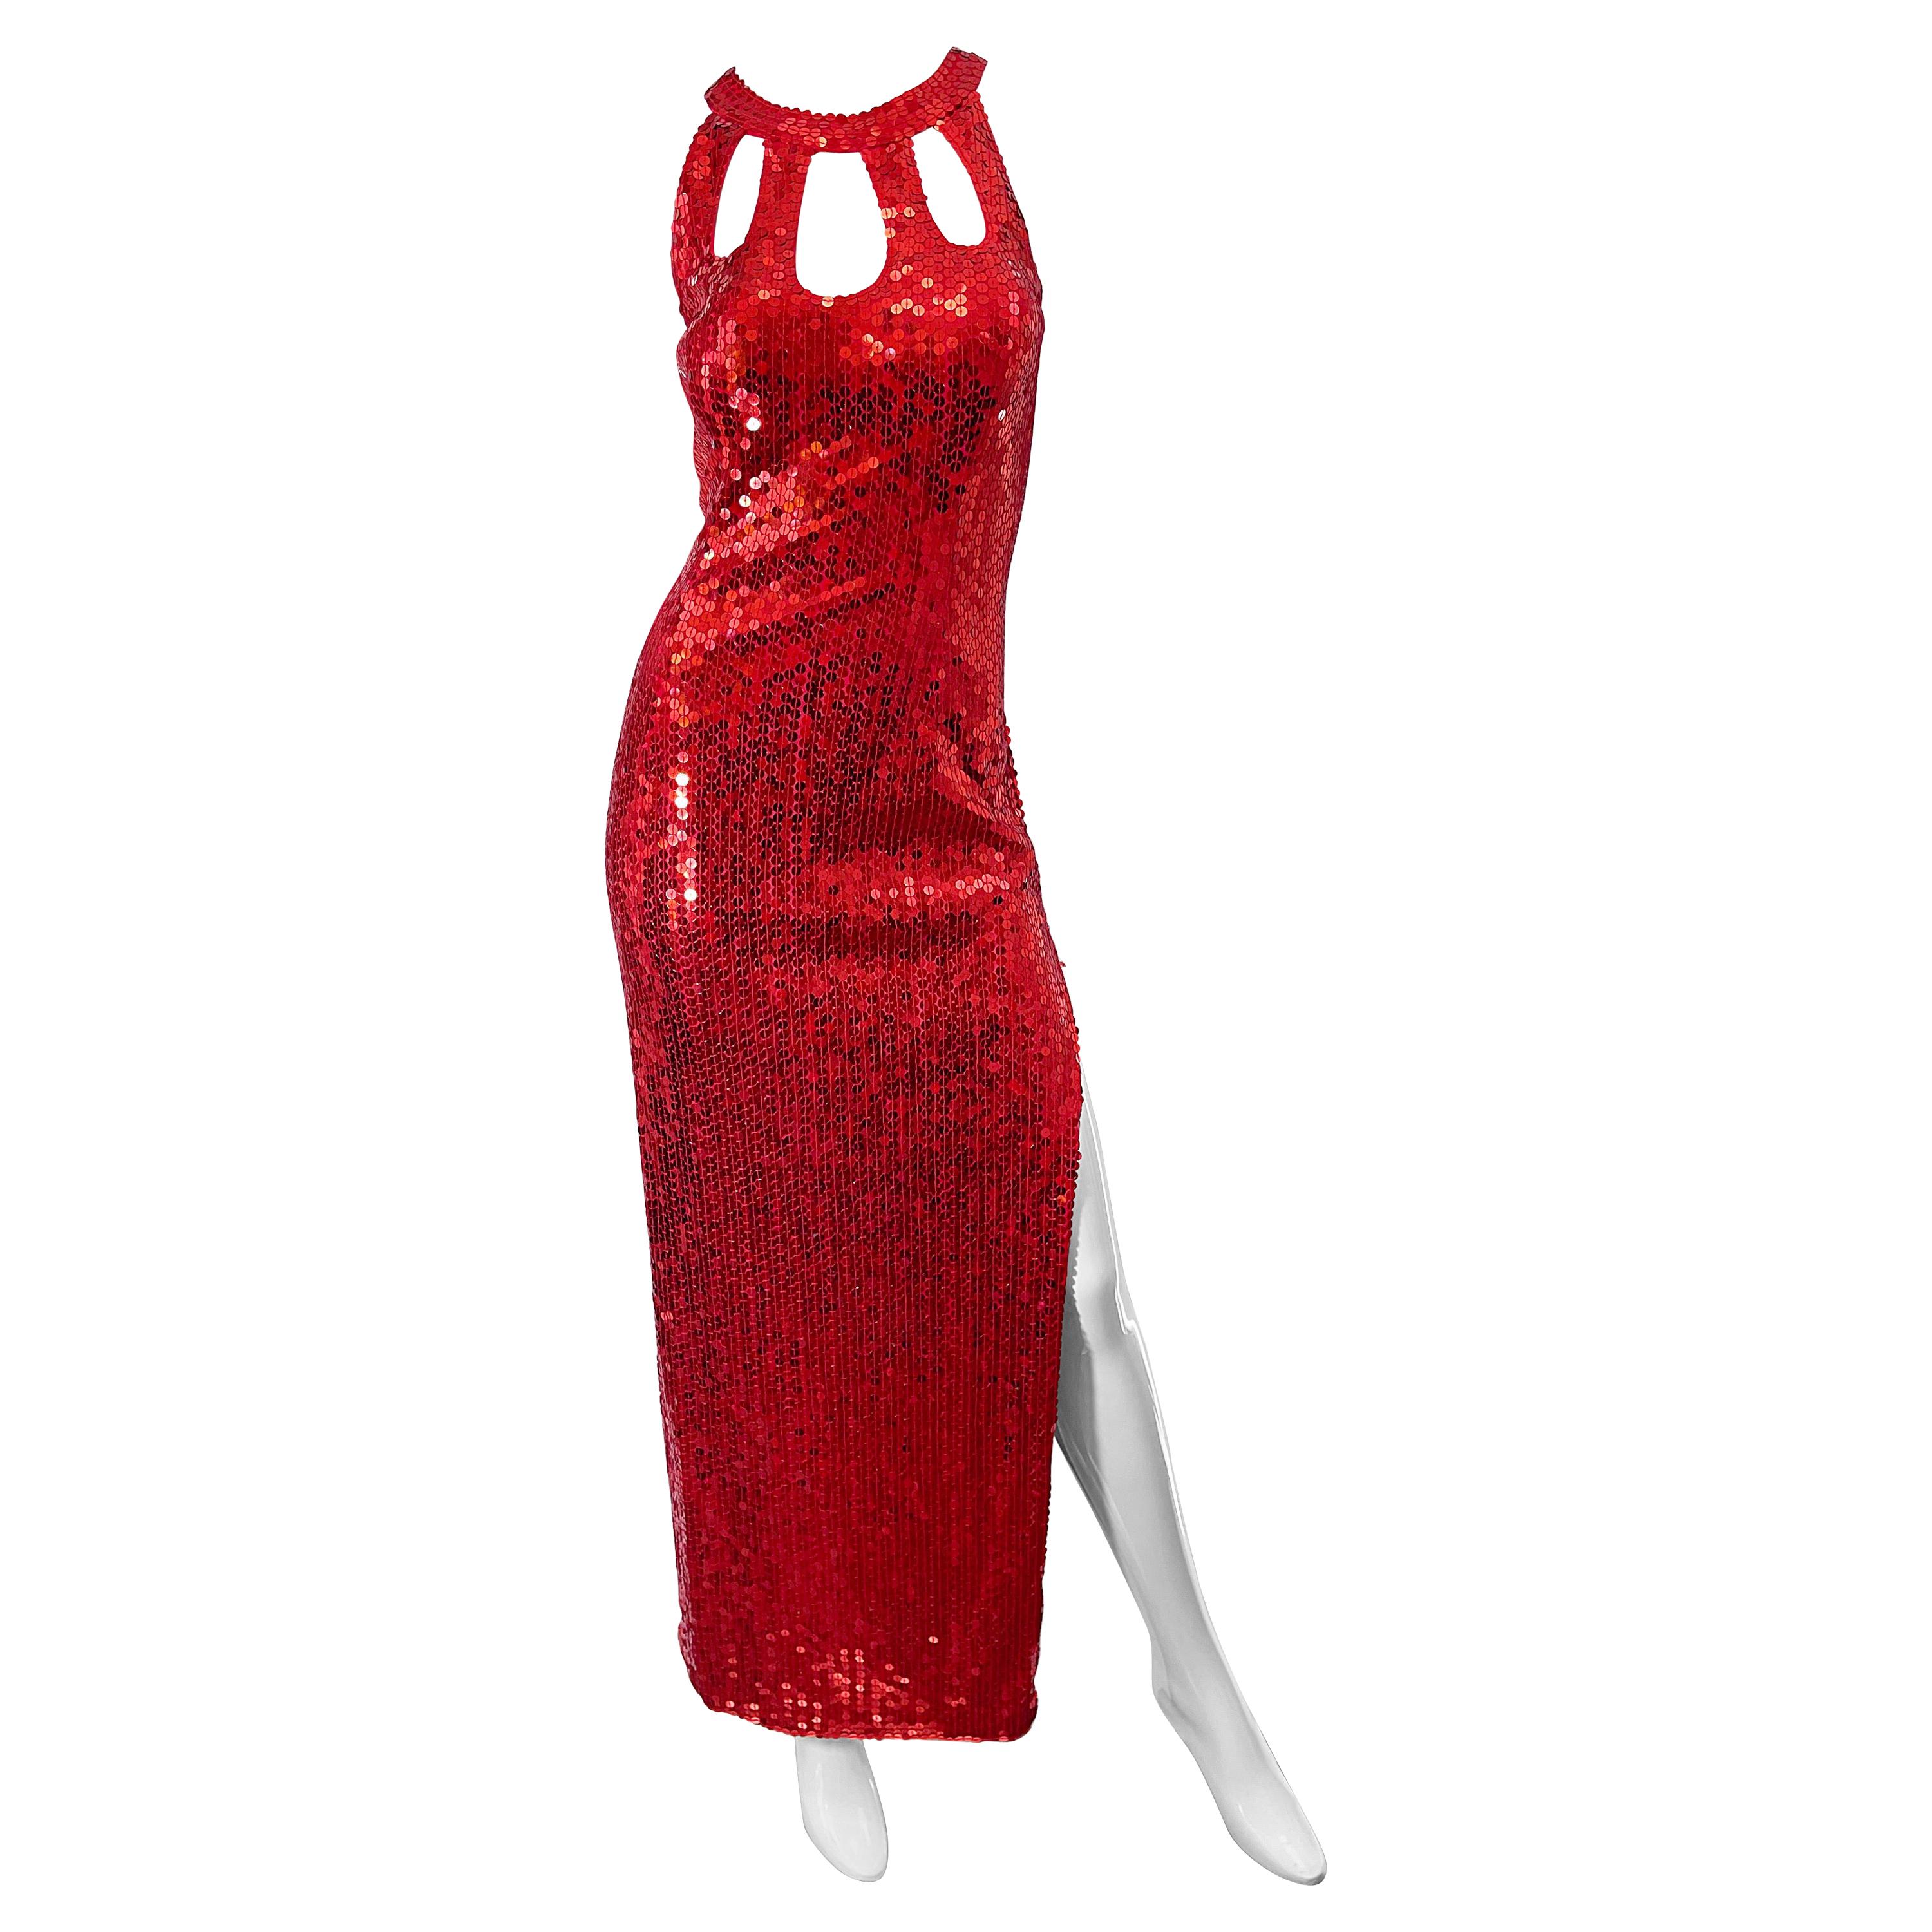 1990s Lipstick Red Sequin Size 10 Sexy Cut Out Vintage 90s Evening Gown Dress